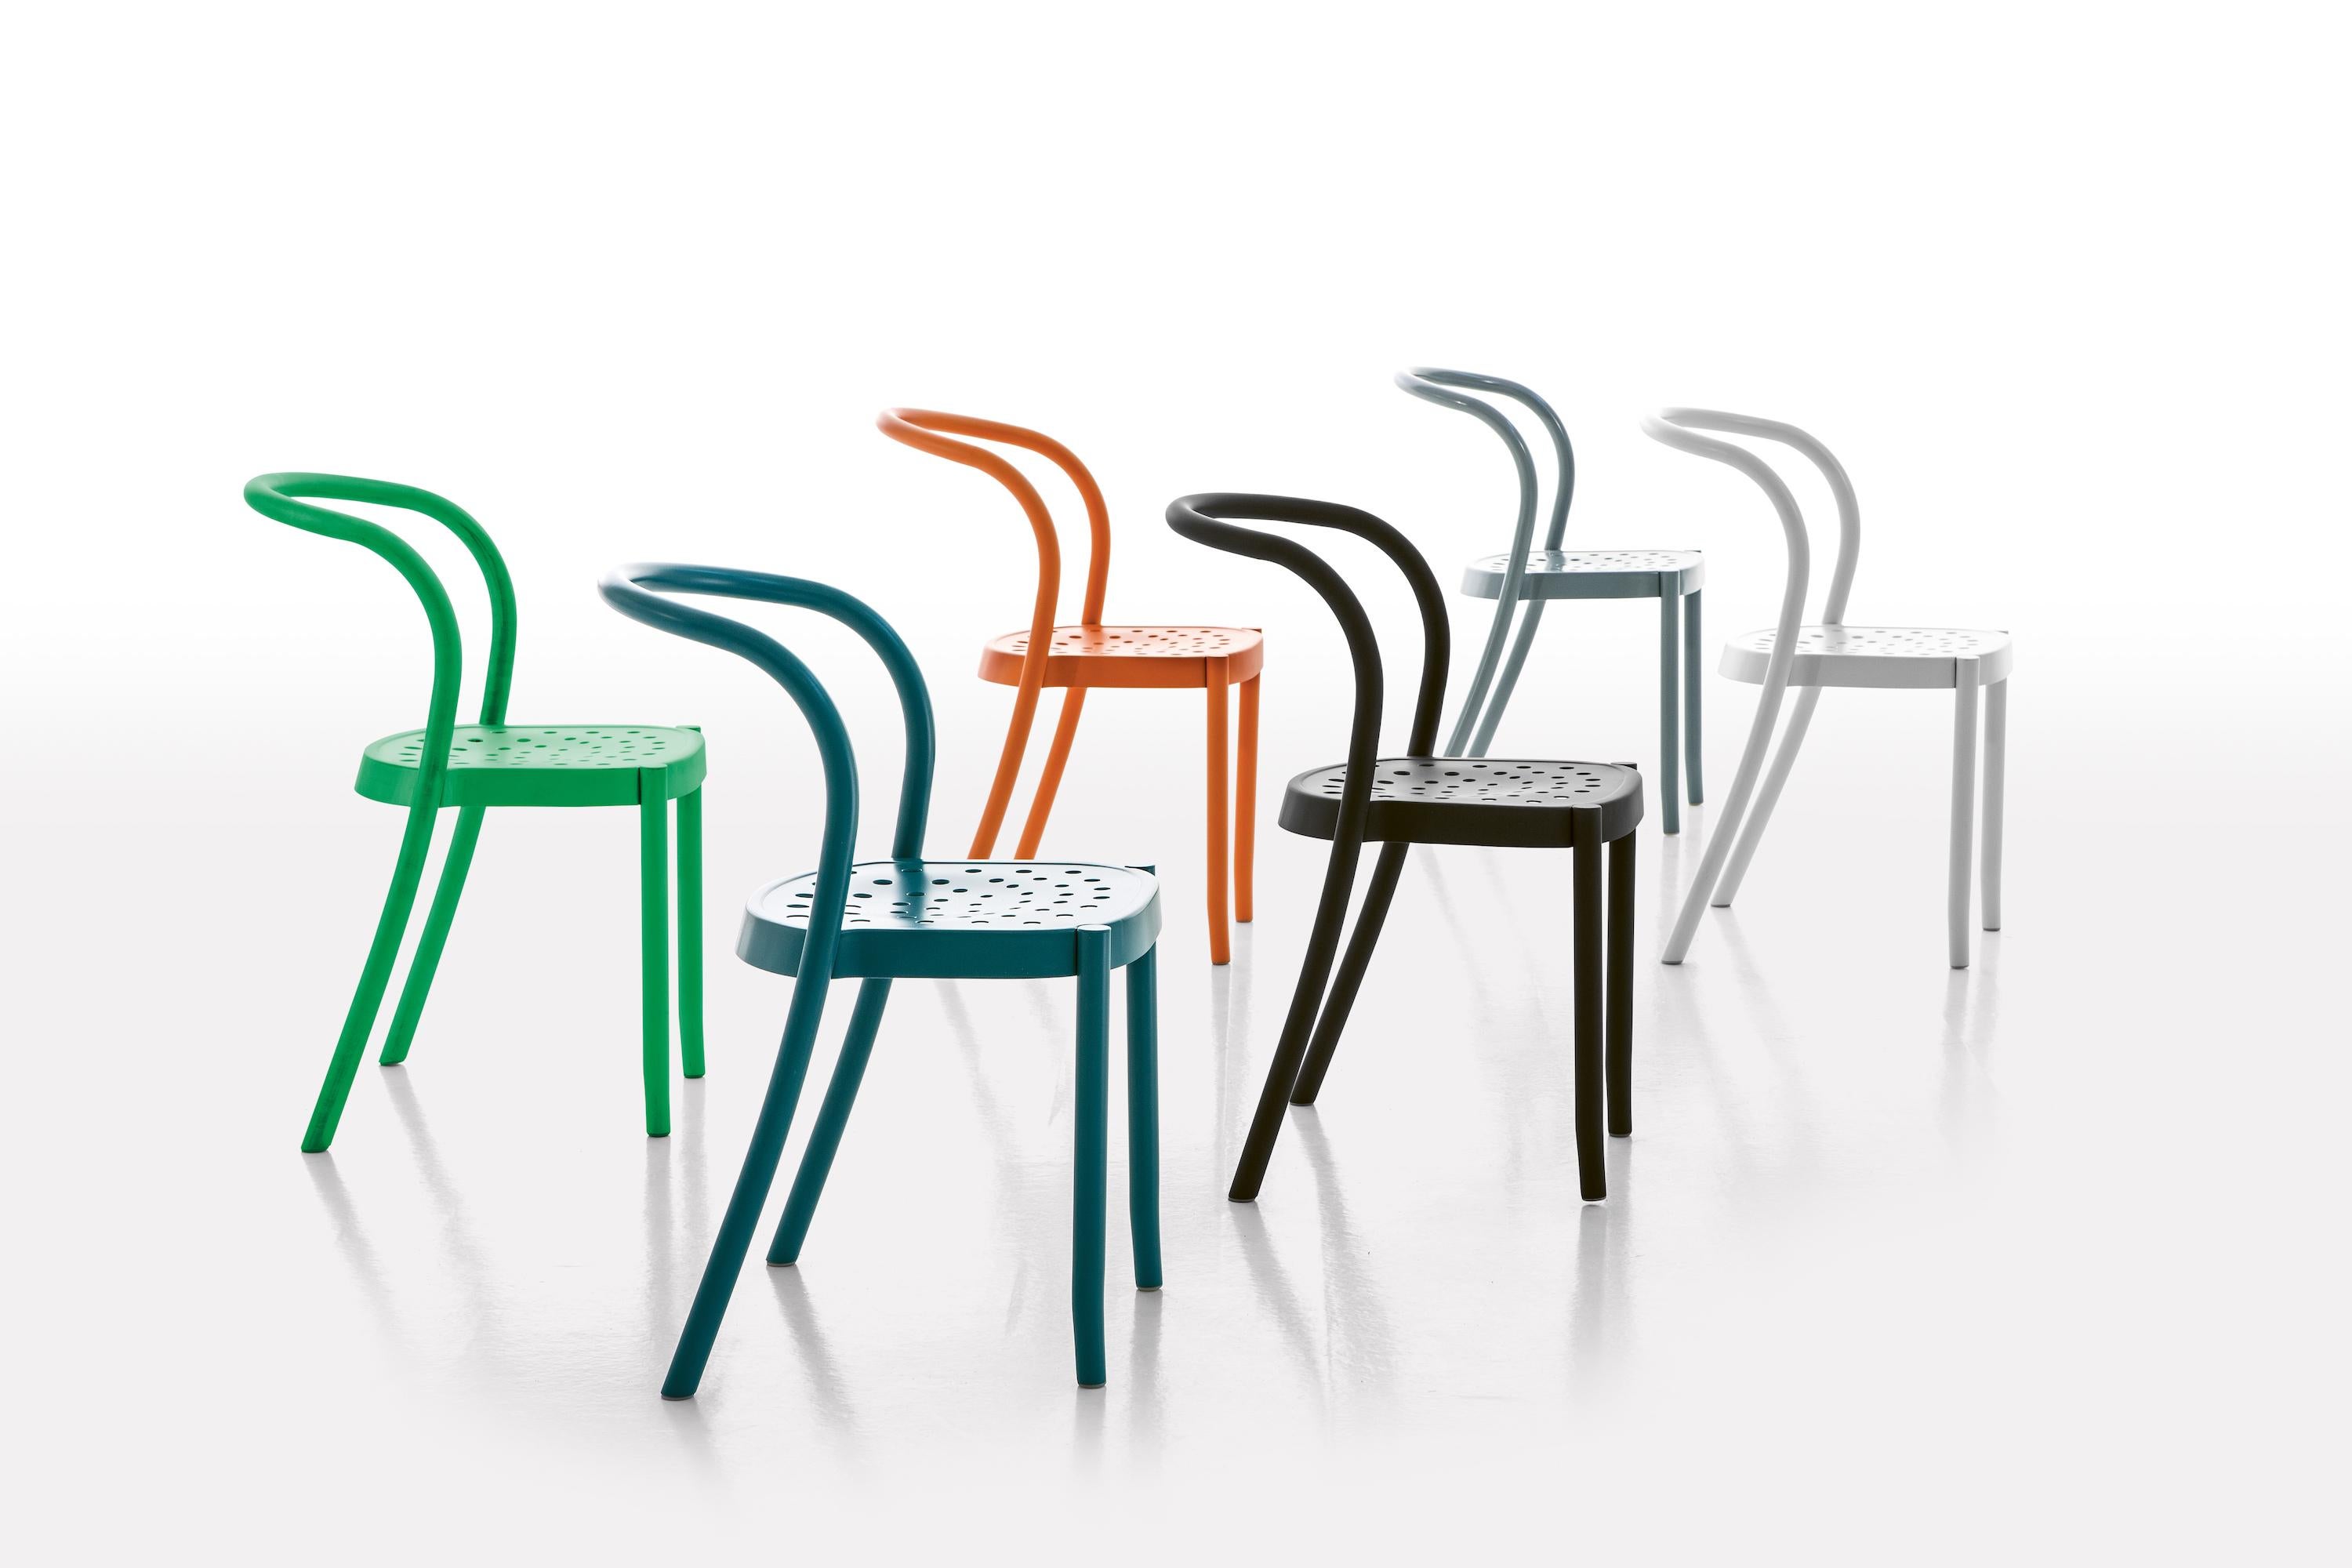 Moroso St Mark Dining Chair in 4 colors Powder Coated Aluminum for Outdoor Use. 

A homage to the “lowly” tradition of the chair made contemporary by using two apparently contrasting materials. With its solidity and comfort the form appears to